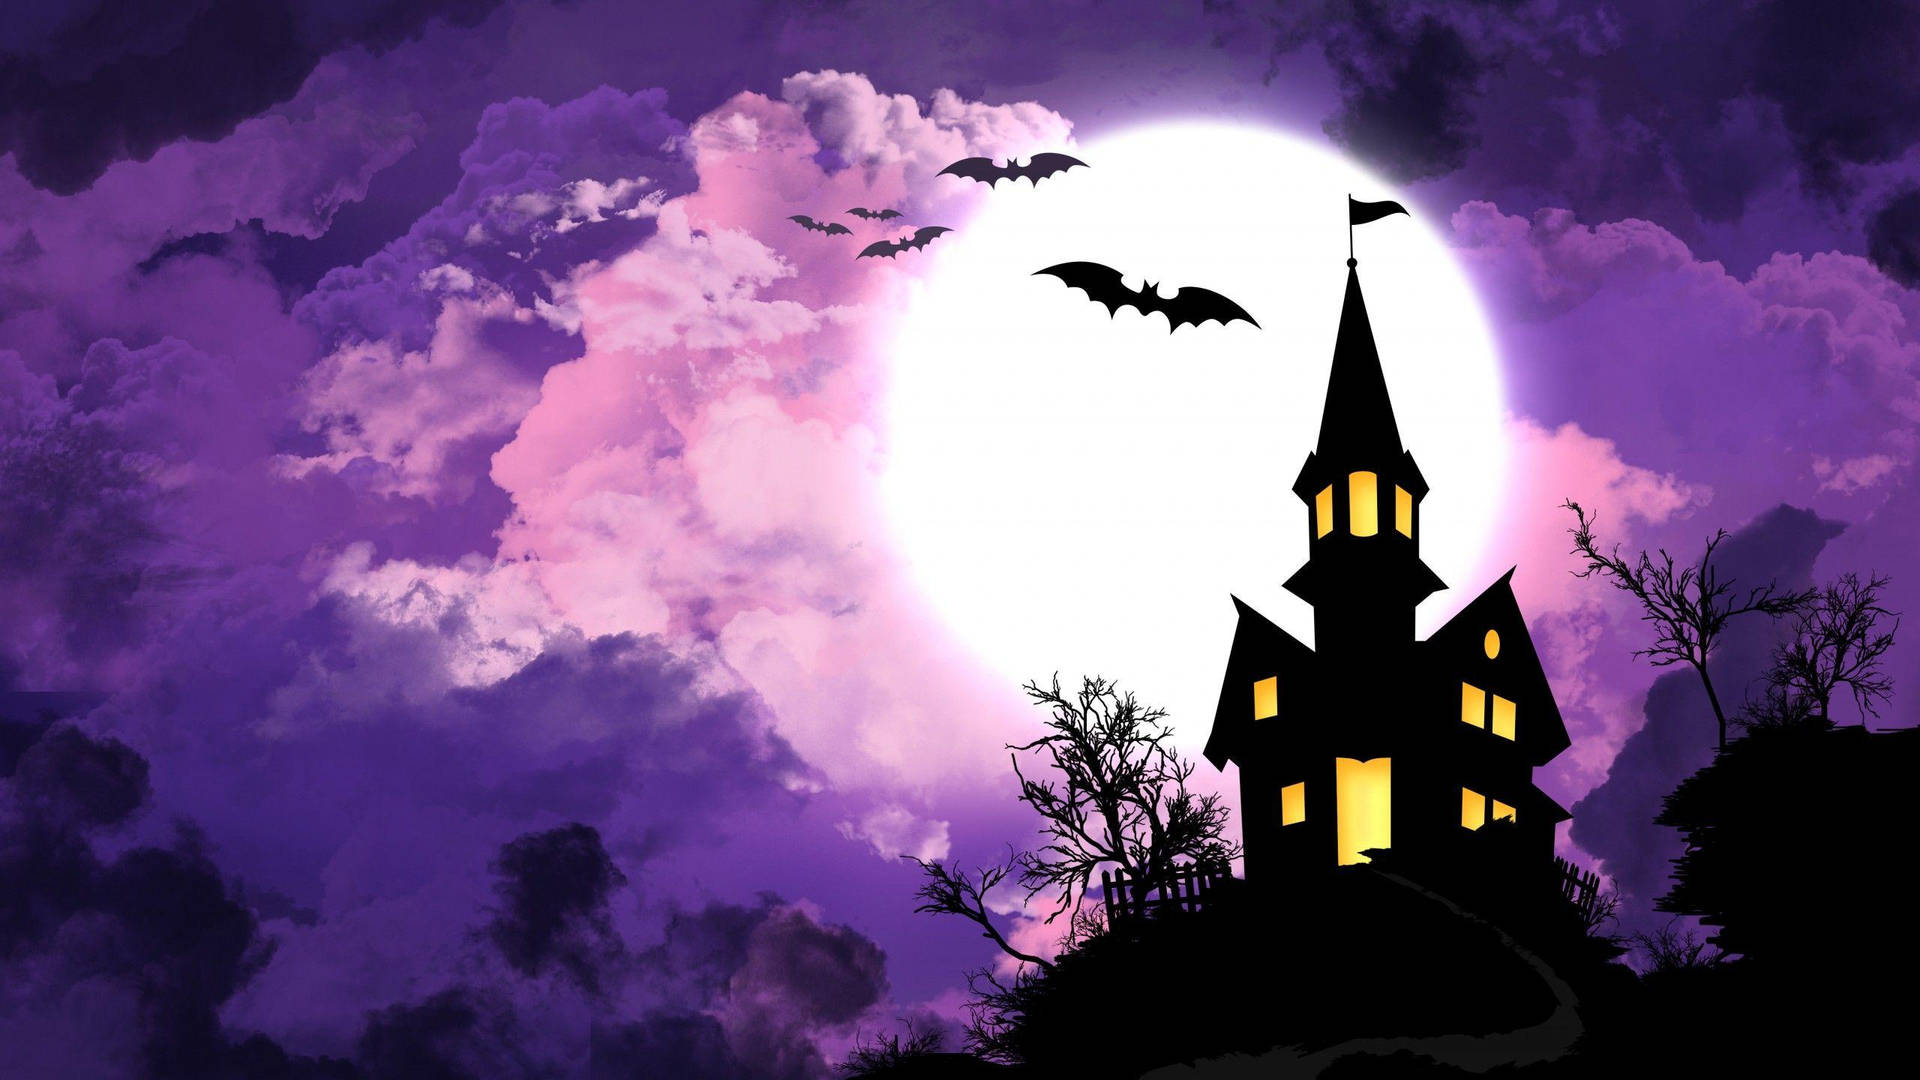 Haunted House With Purple Night Sky Wallpaper